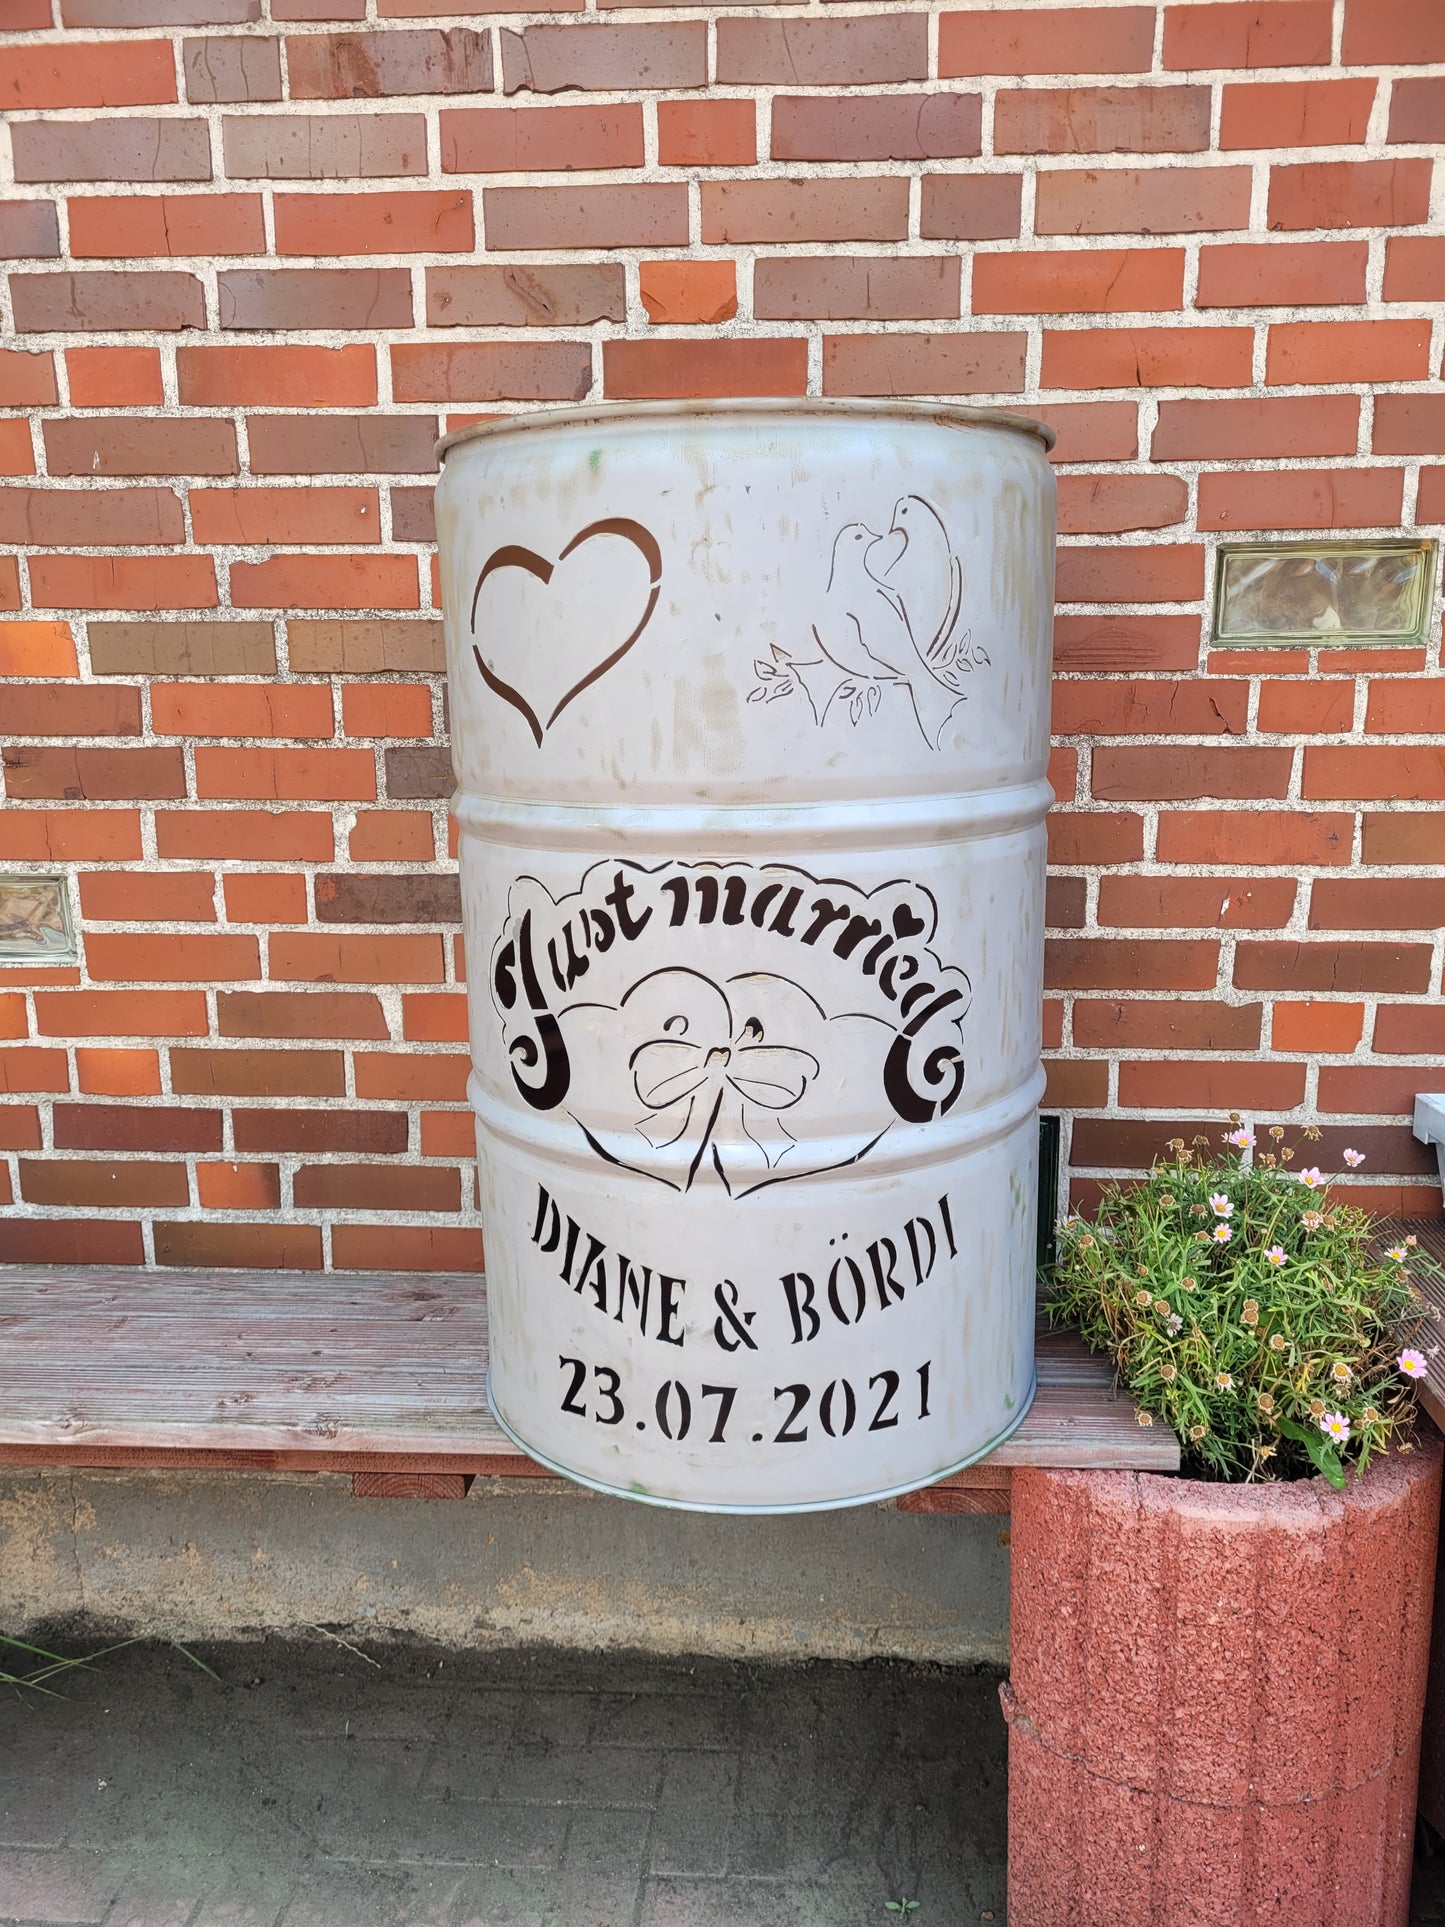 Fire barrel wedding inc. Name and date